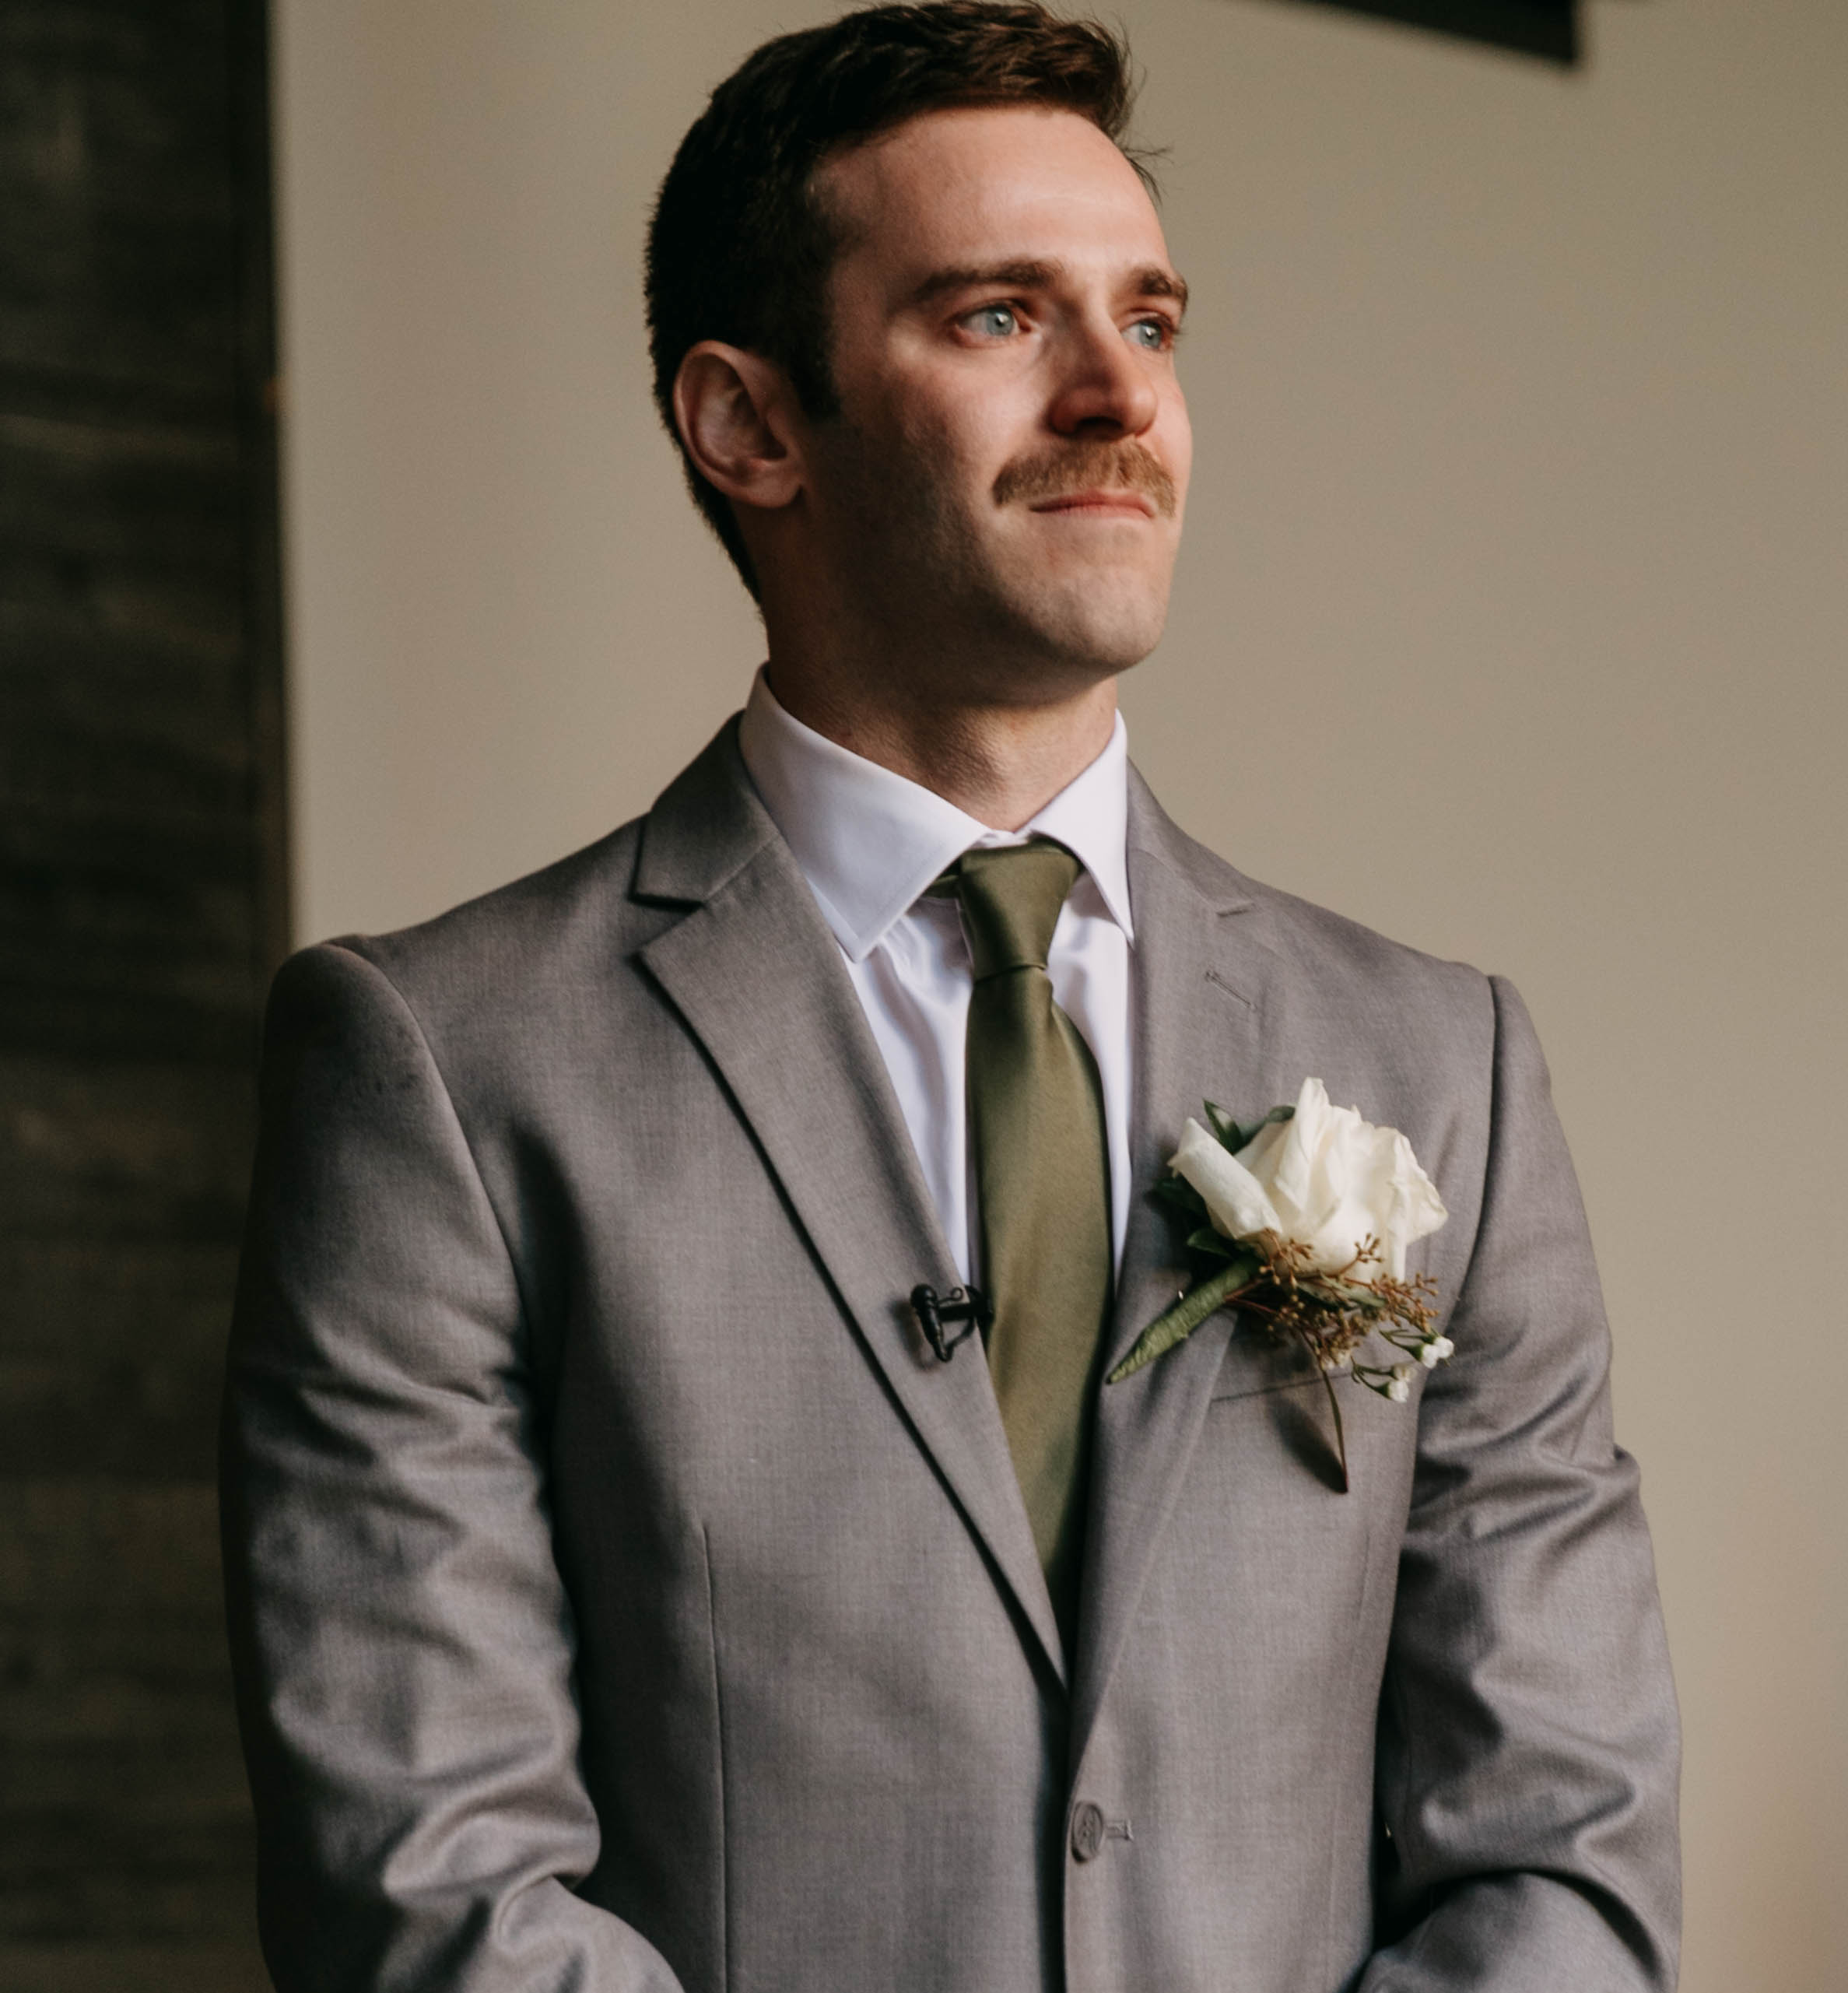 Groom's reaction photograph to bride walking down aisle. Documentary photograph of a wedding ceremony at Hotel covington courtyard.